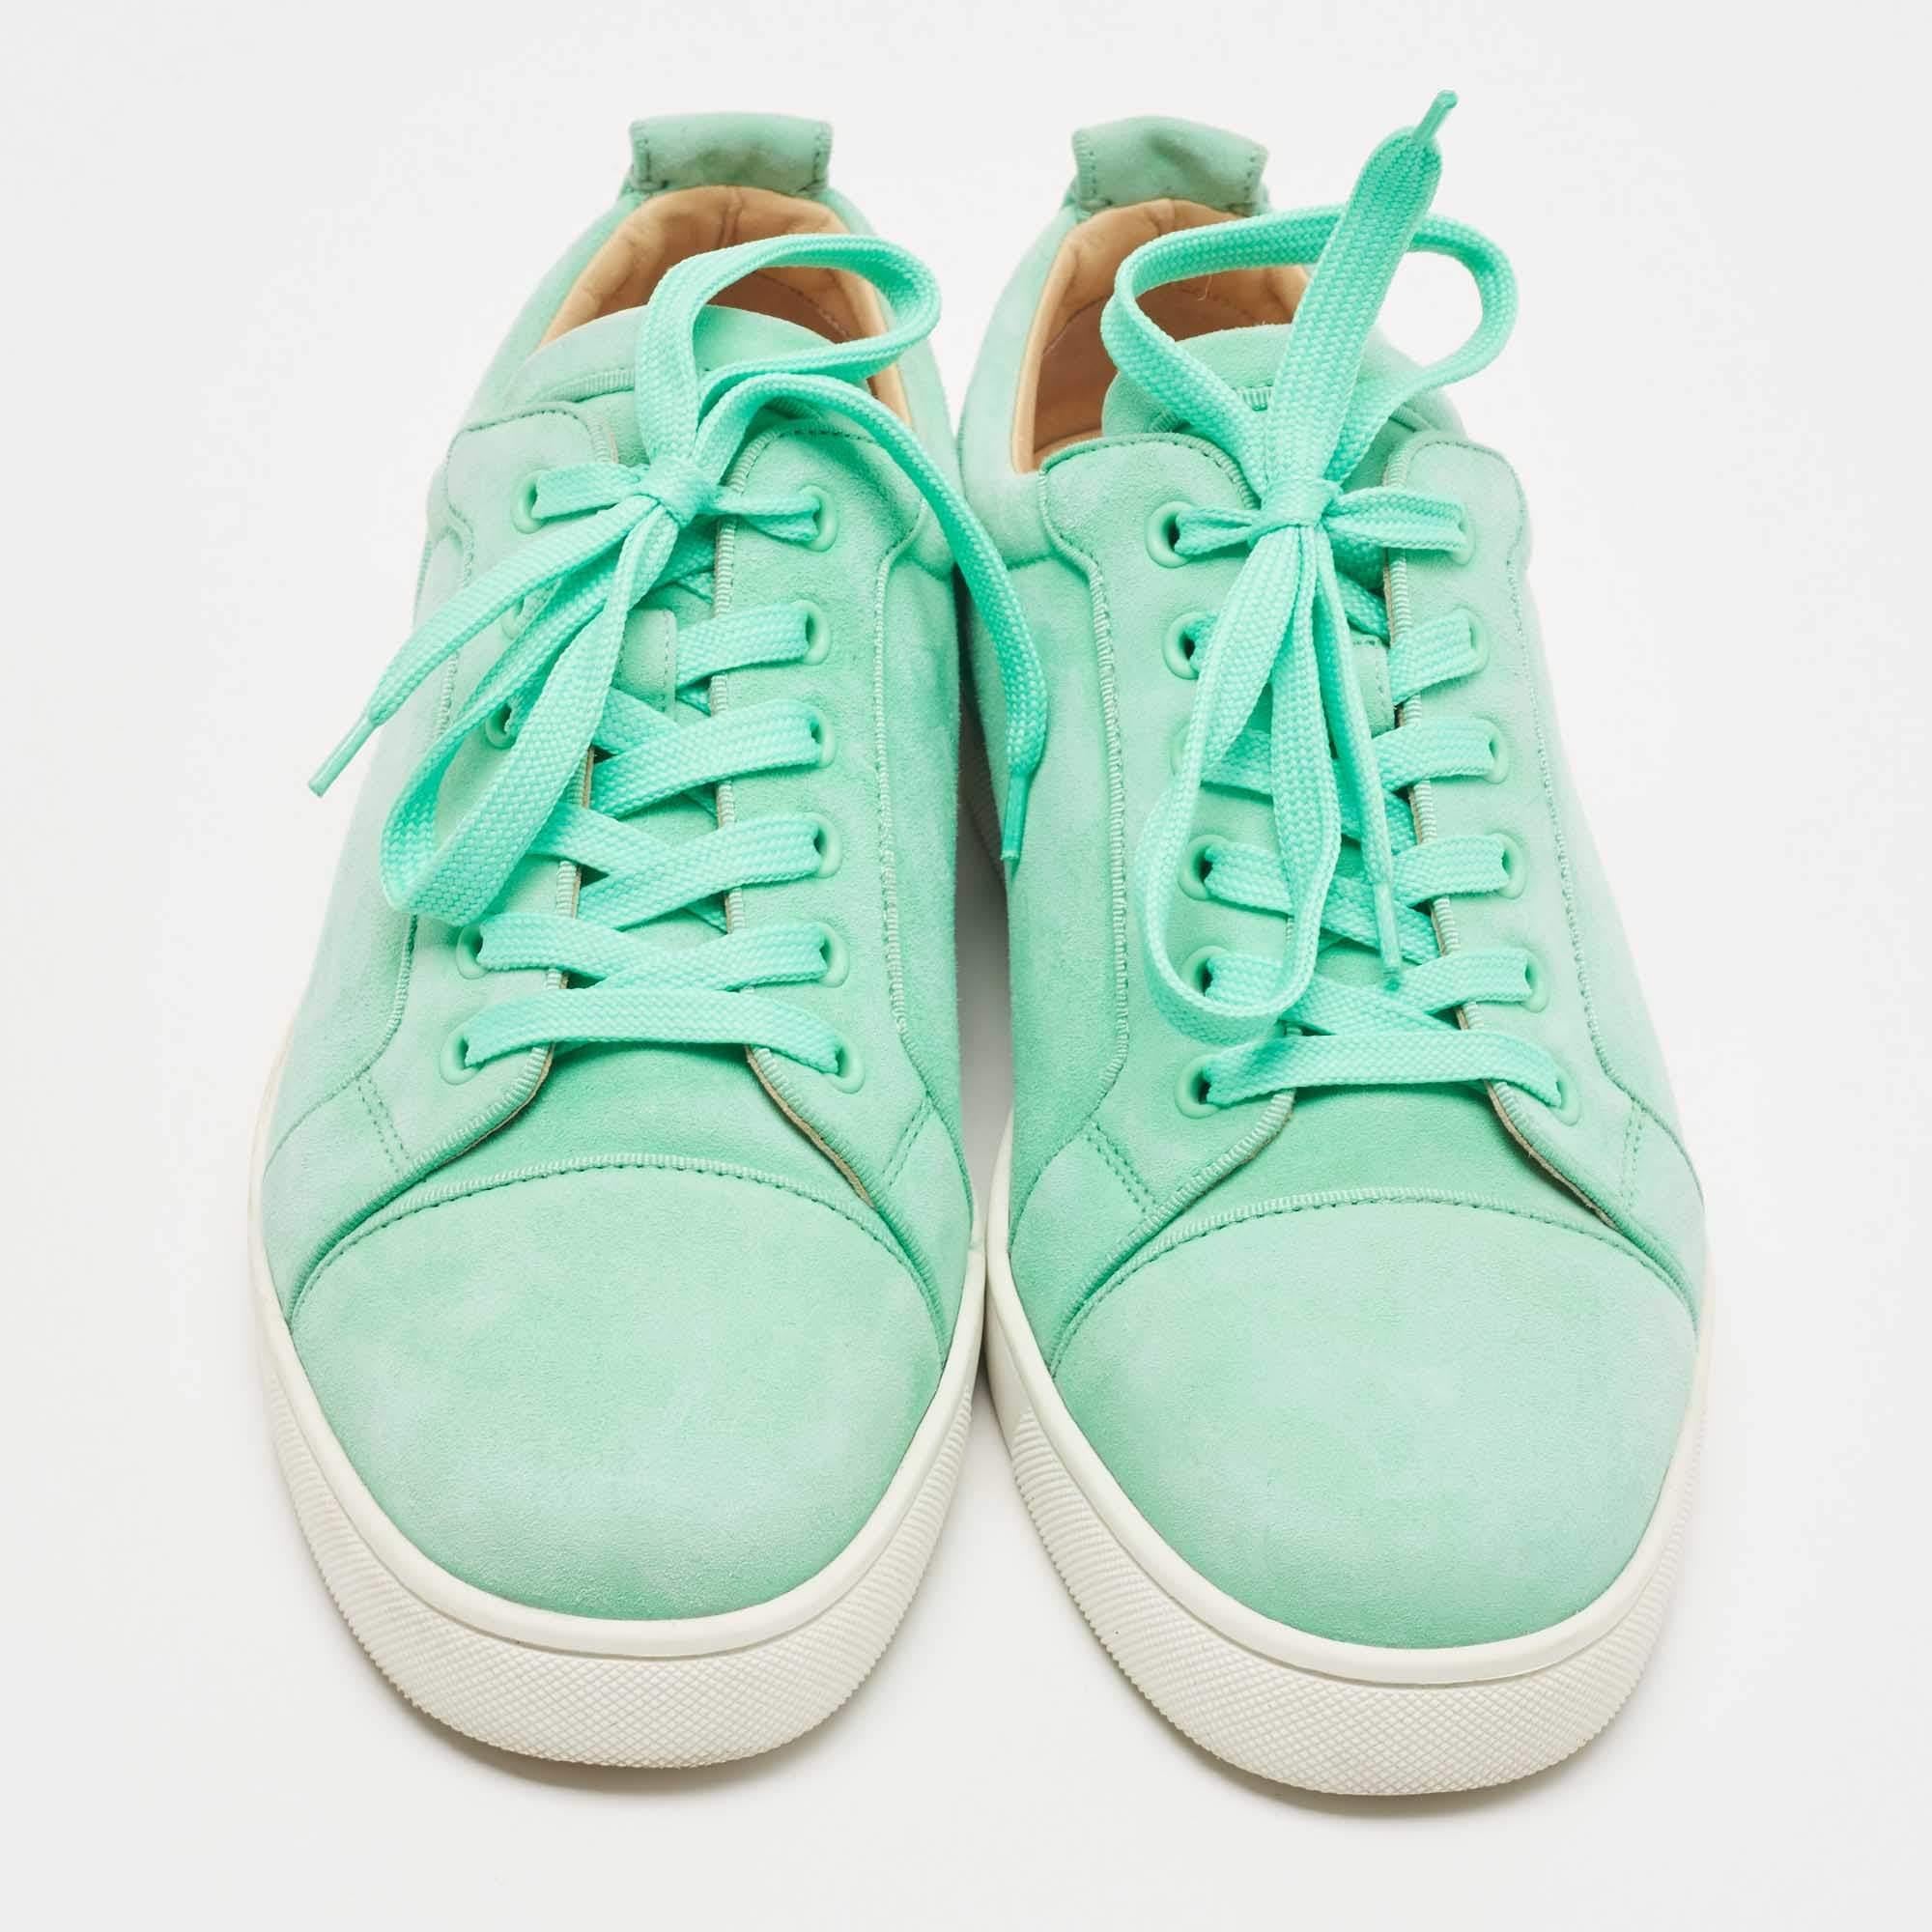 Give your outfit a luxe update with this pair of designer sneakers. The shoes are sewn perfectly to help you make a statement in them for a long time.

